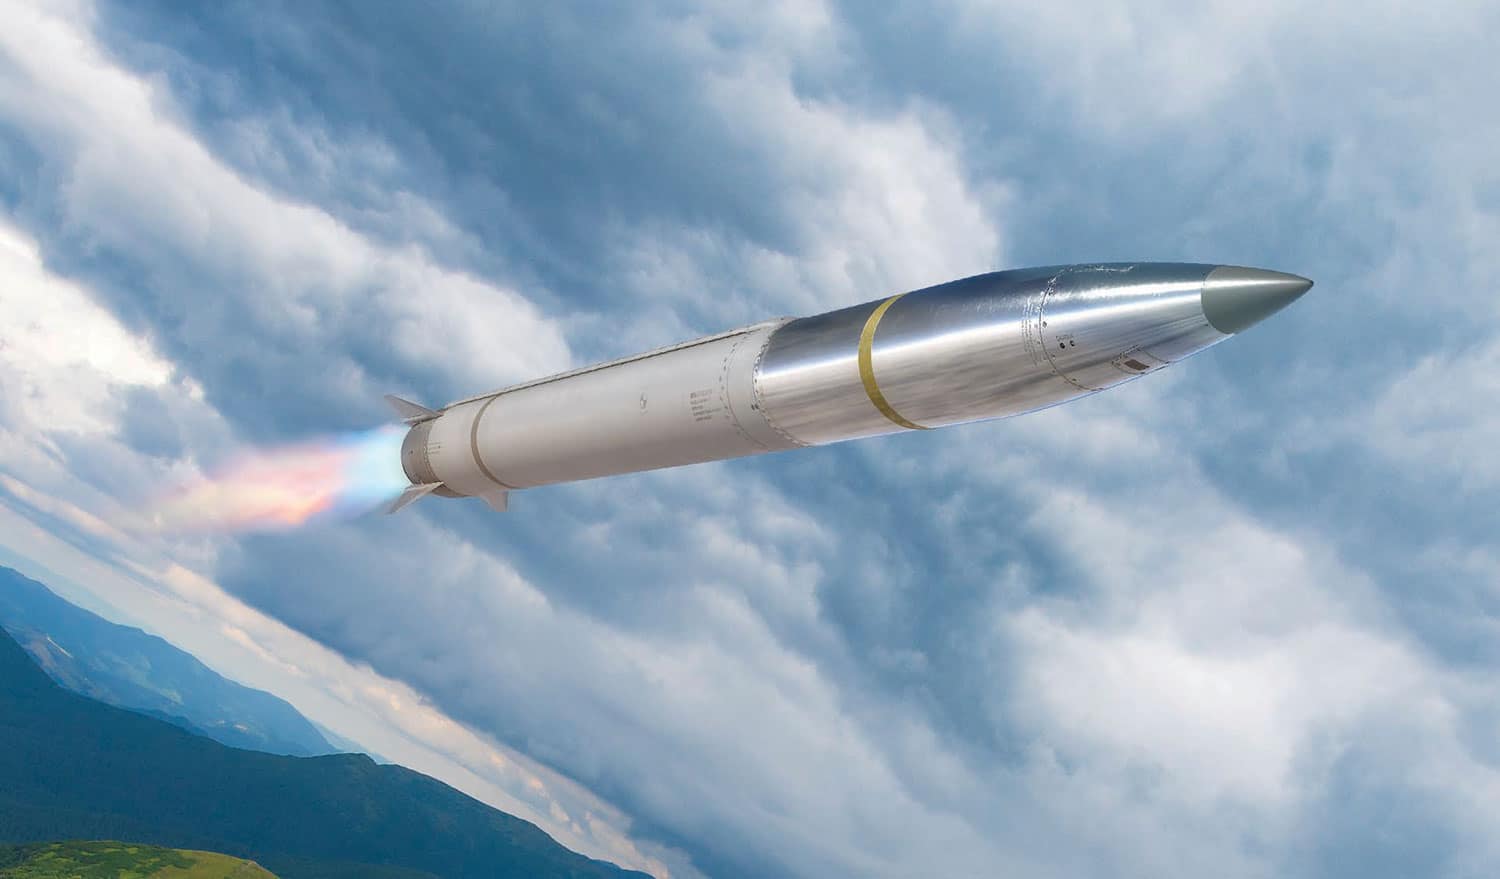 Lockheed Martin’s ER GMLRS will nearly double the range of the current munition while maintaining proven precision.